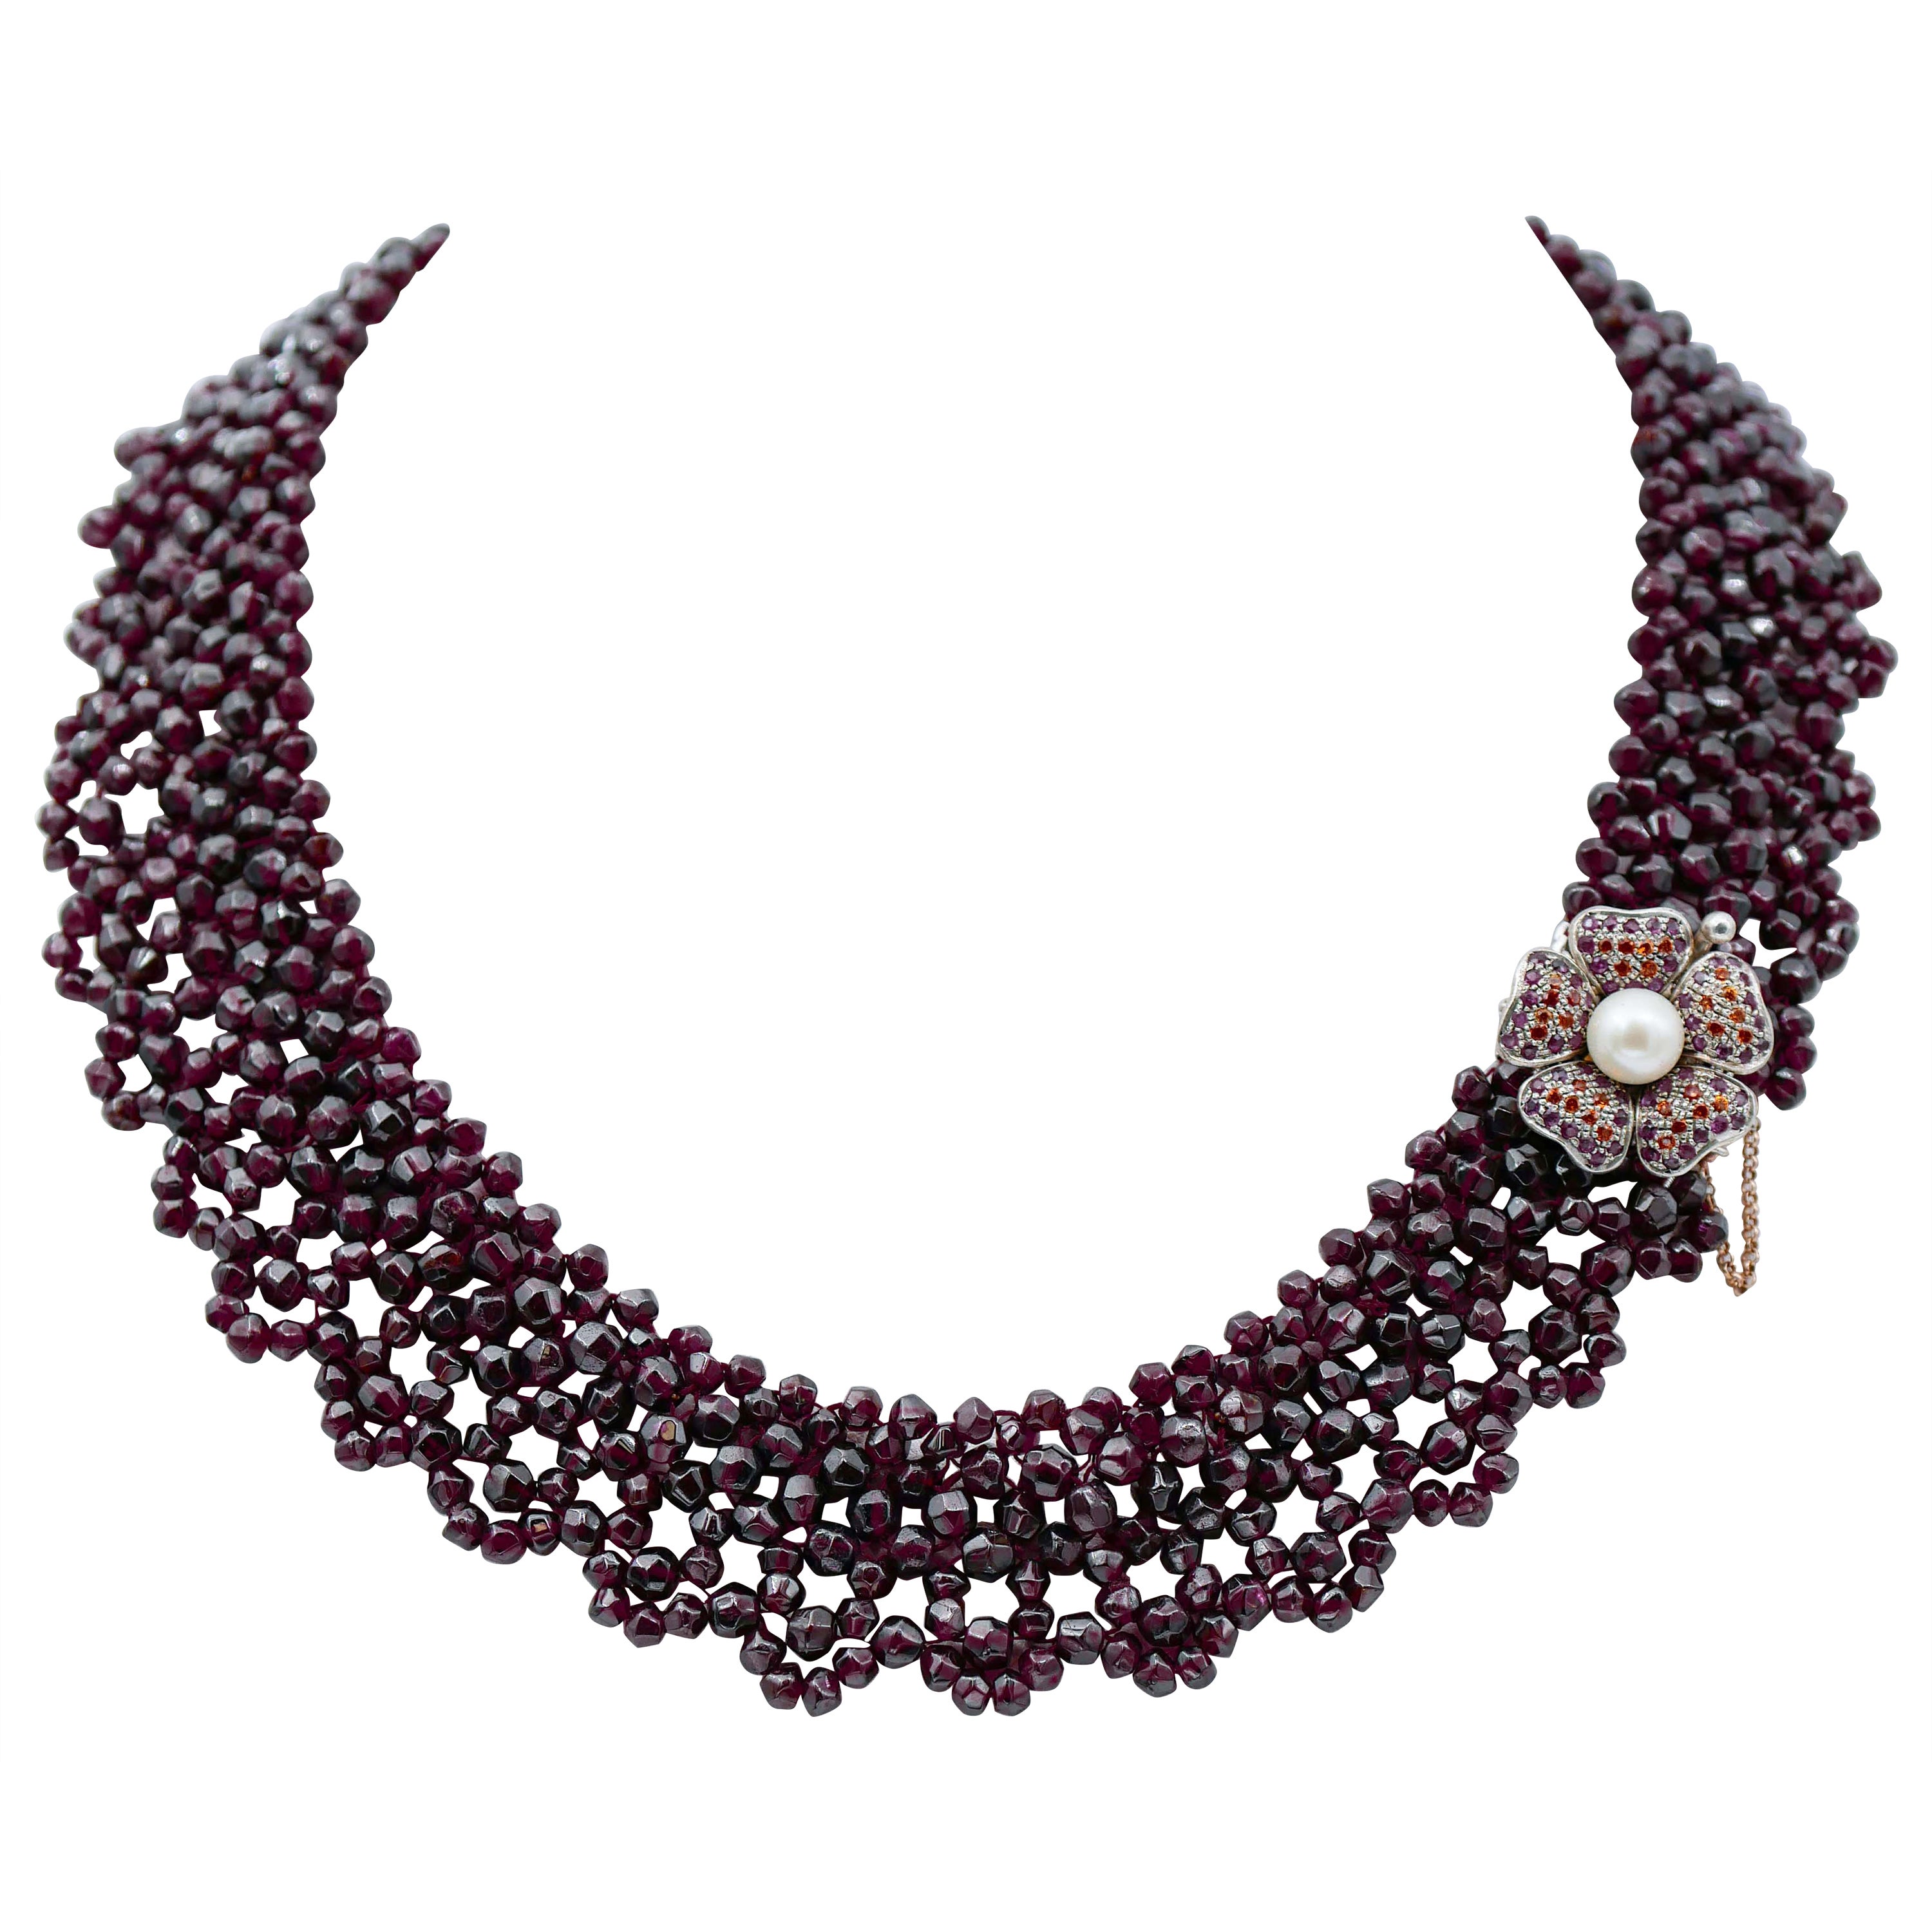 Rubies, Garnets, Stones, Pearl, Rose Gold and Silver Multi-Strands Necklace For Sale